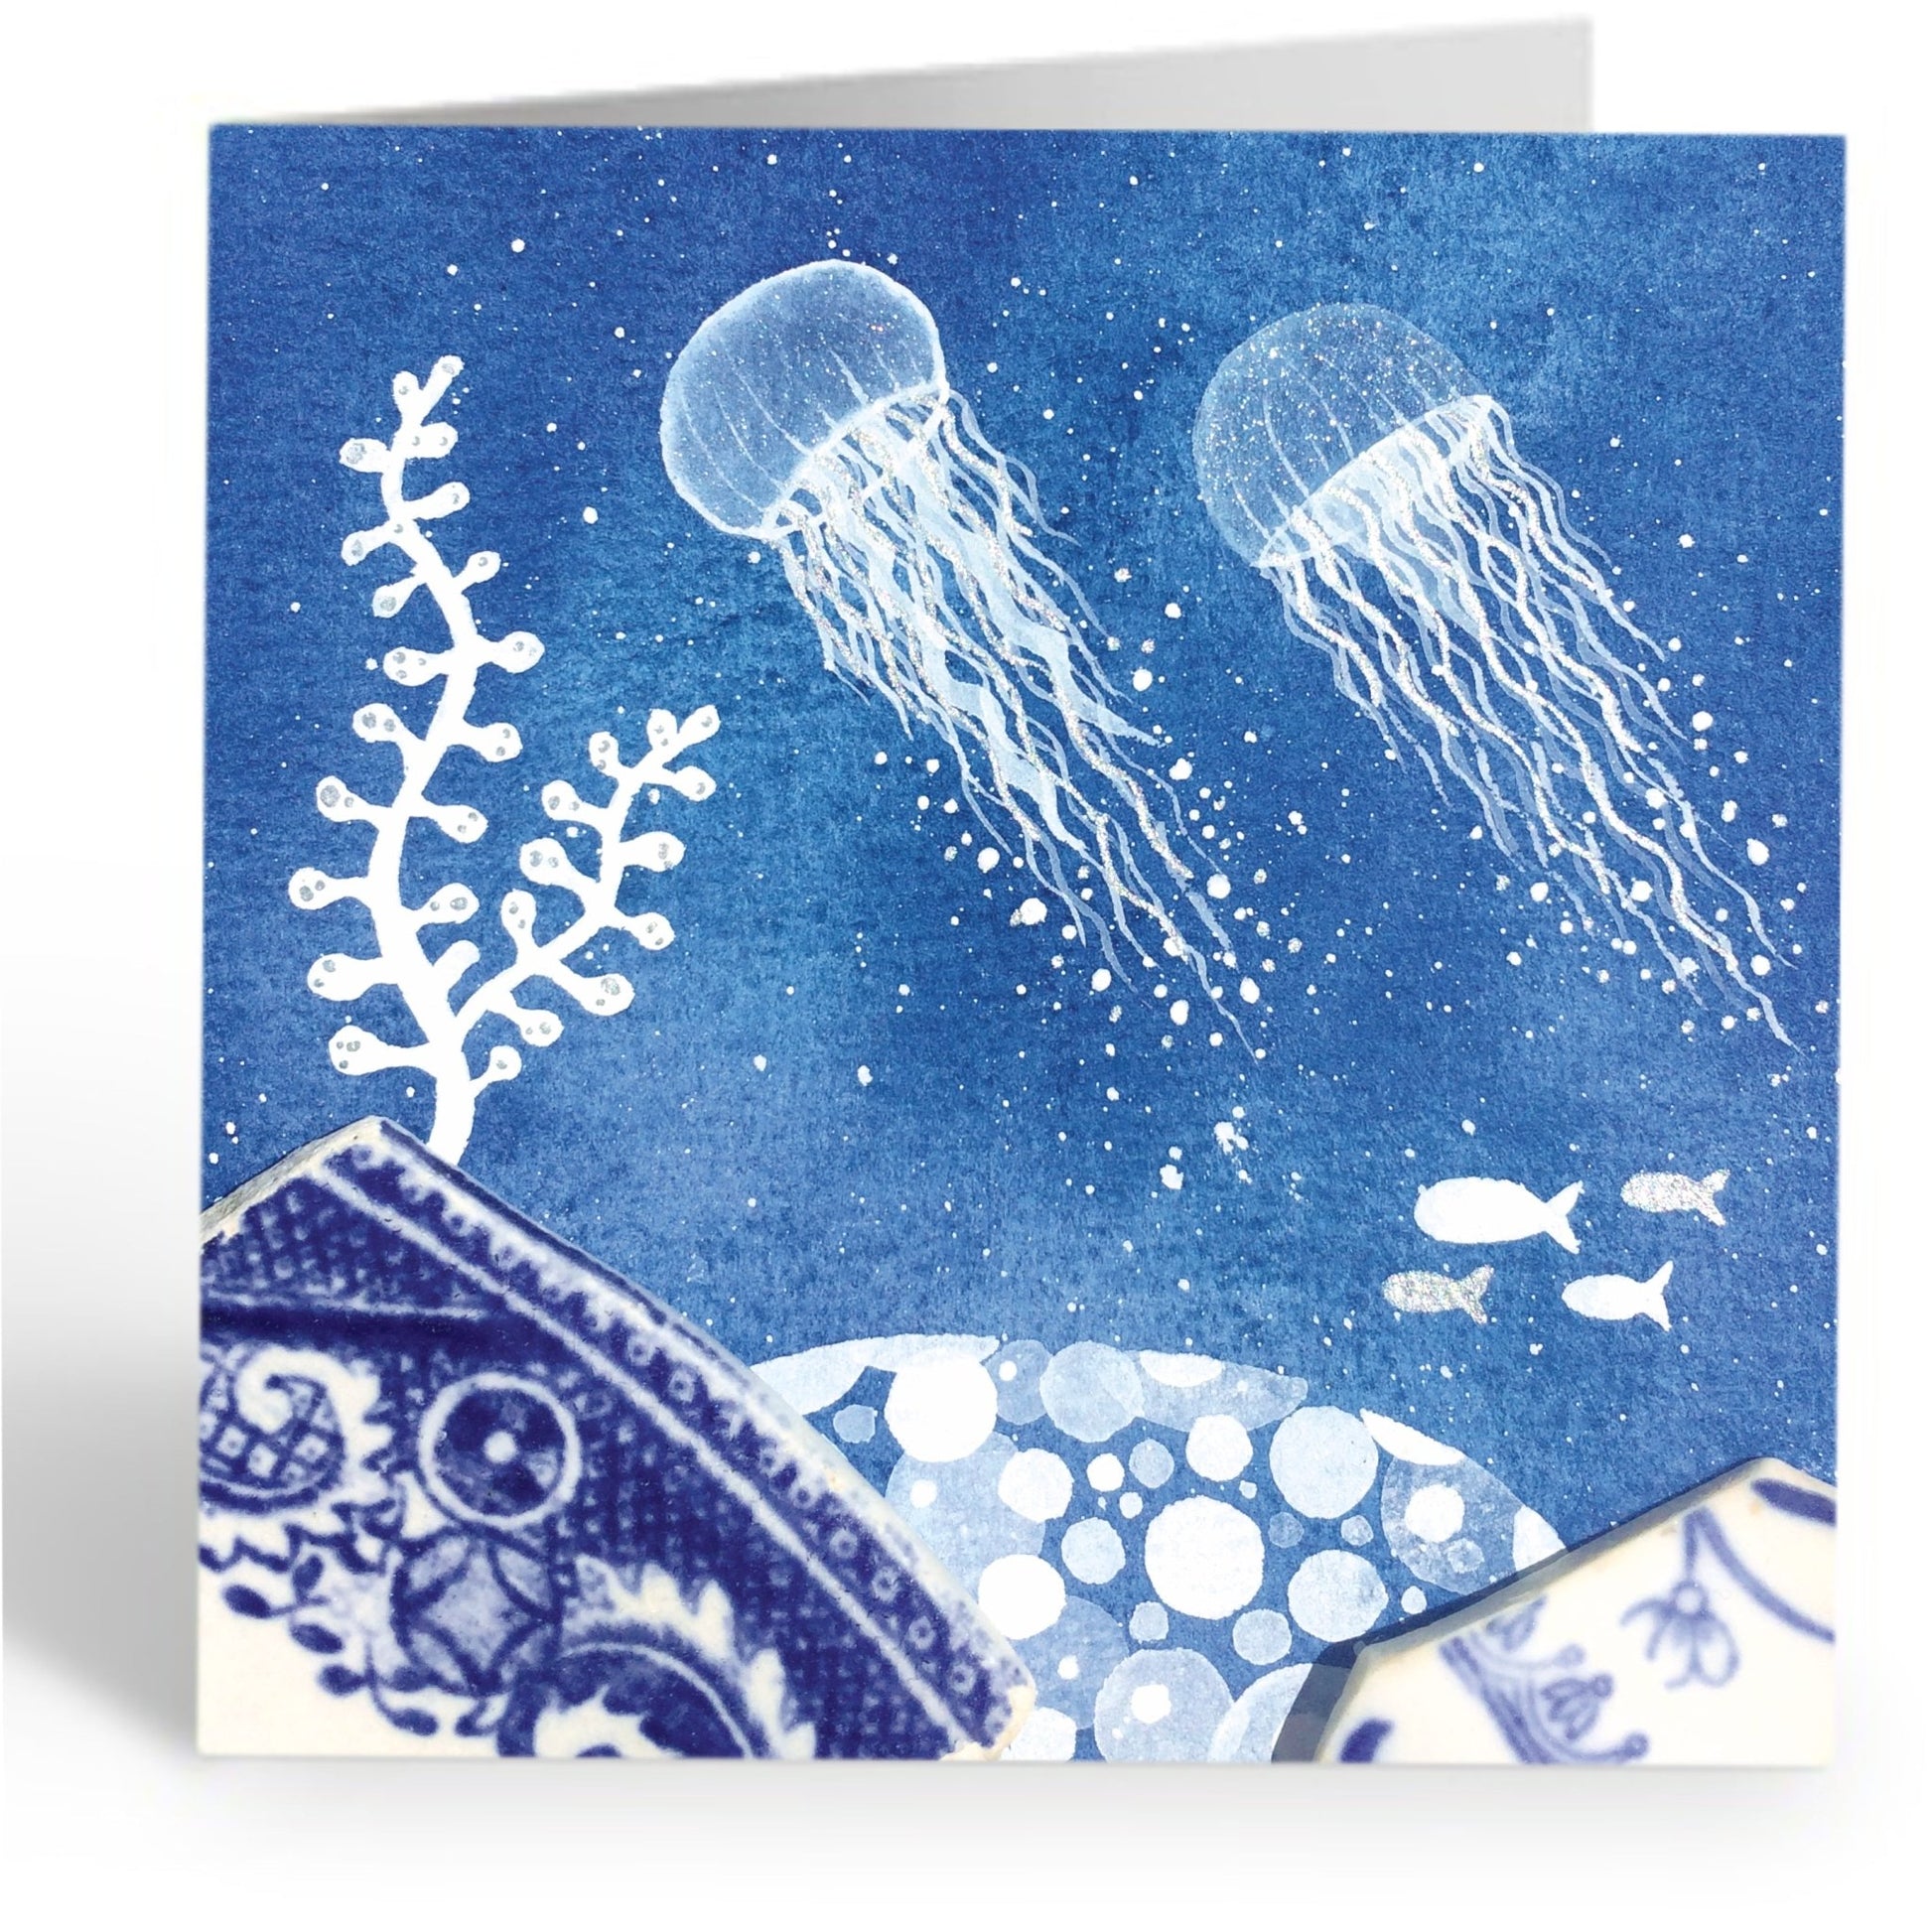 Greetings Cards (Pack of 4) "Under the Waves" Whale, Jellyfish, Octopus, Turtle - East Neuk Beach Crafts